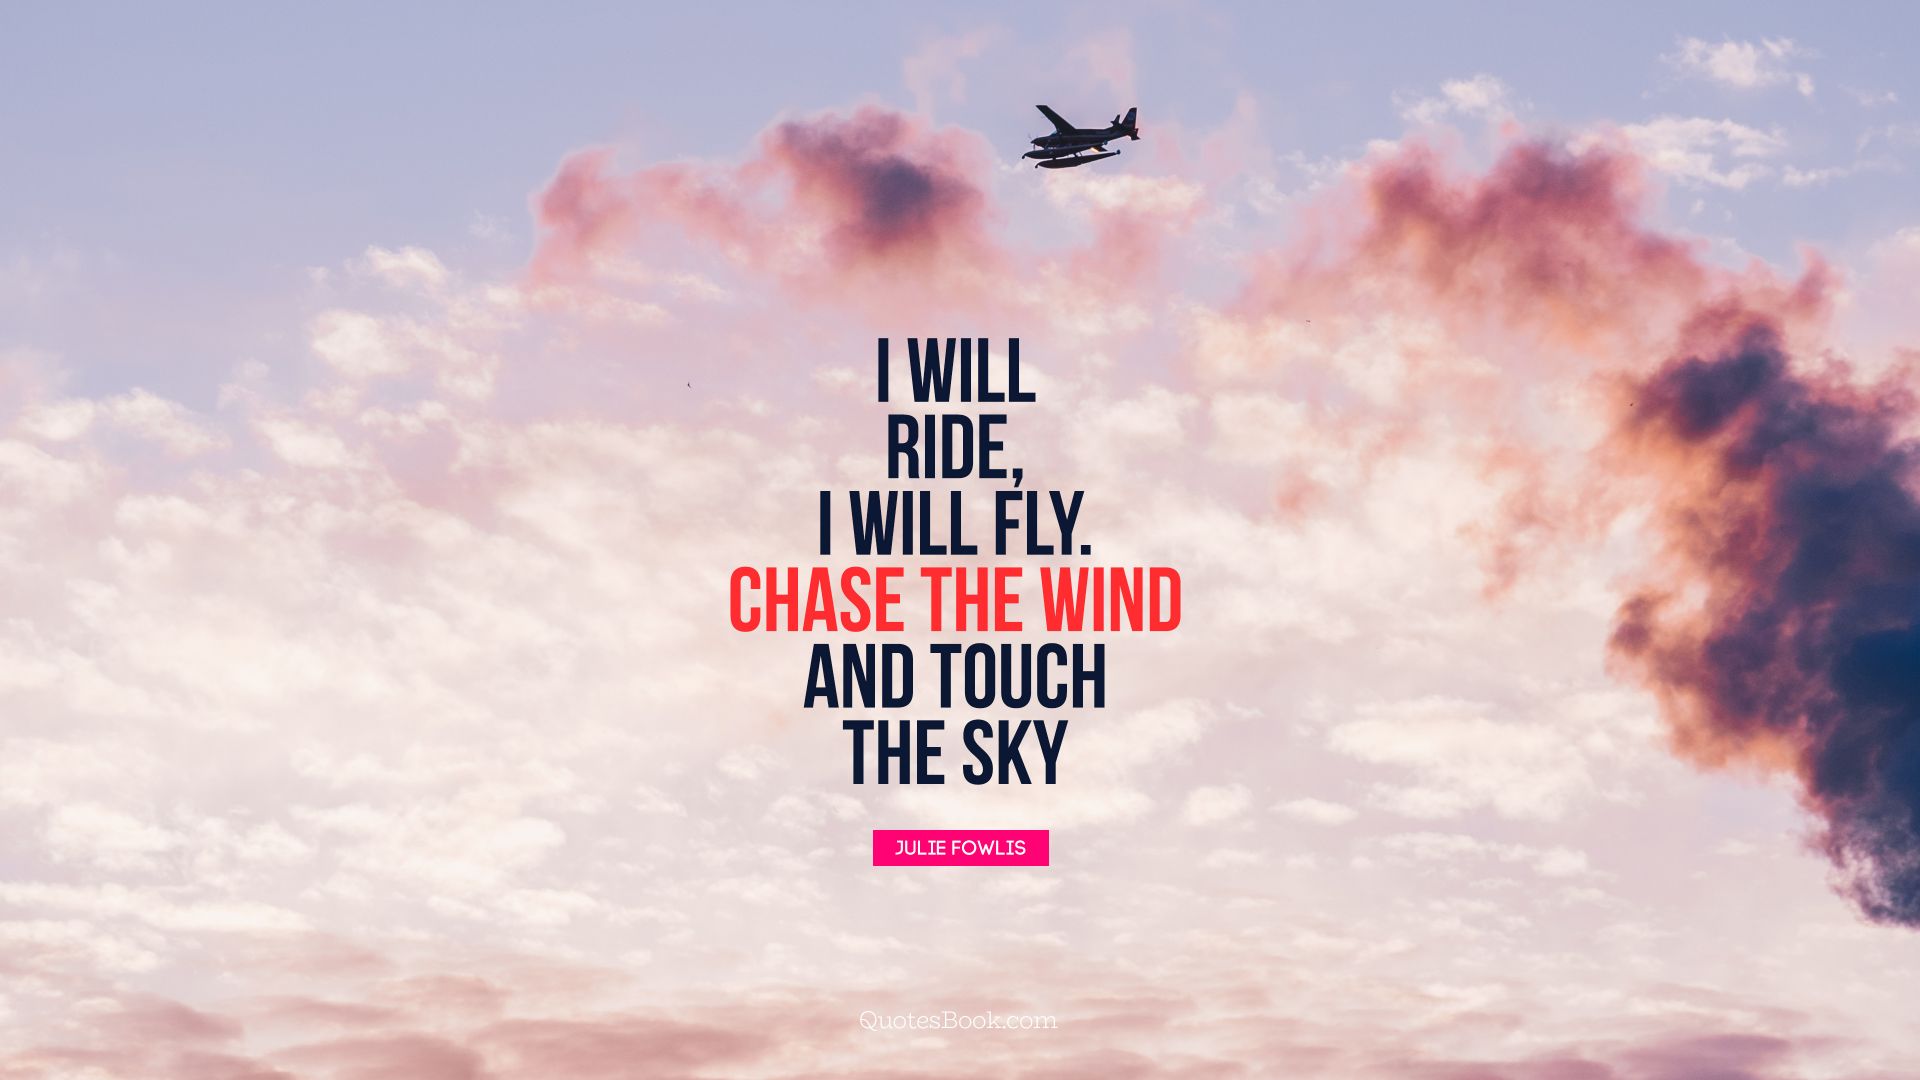 I will ride, I will fly. Chase the wind and touch the sky. - Quote by Julie Fowlis